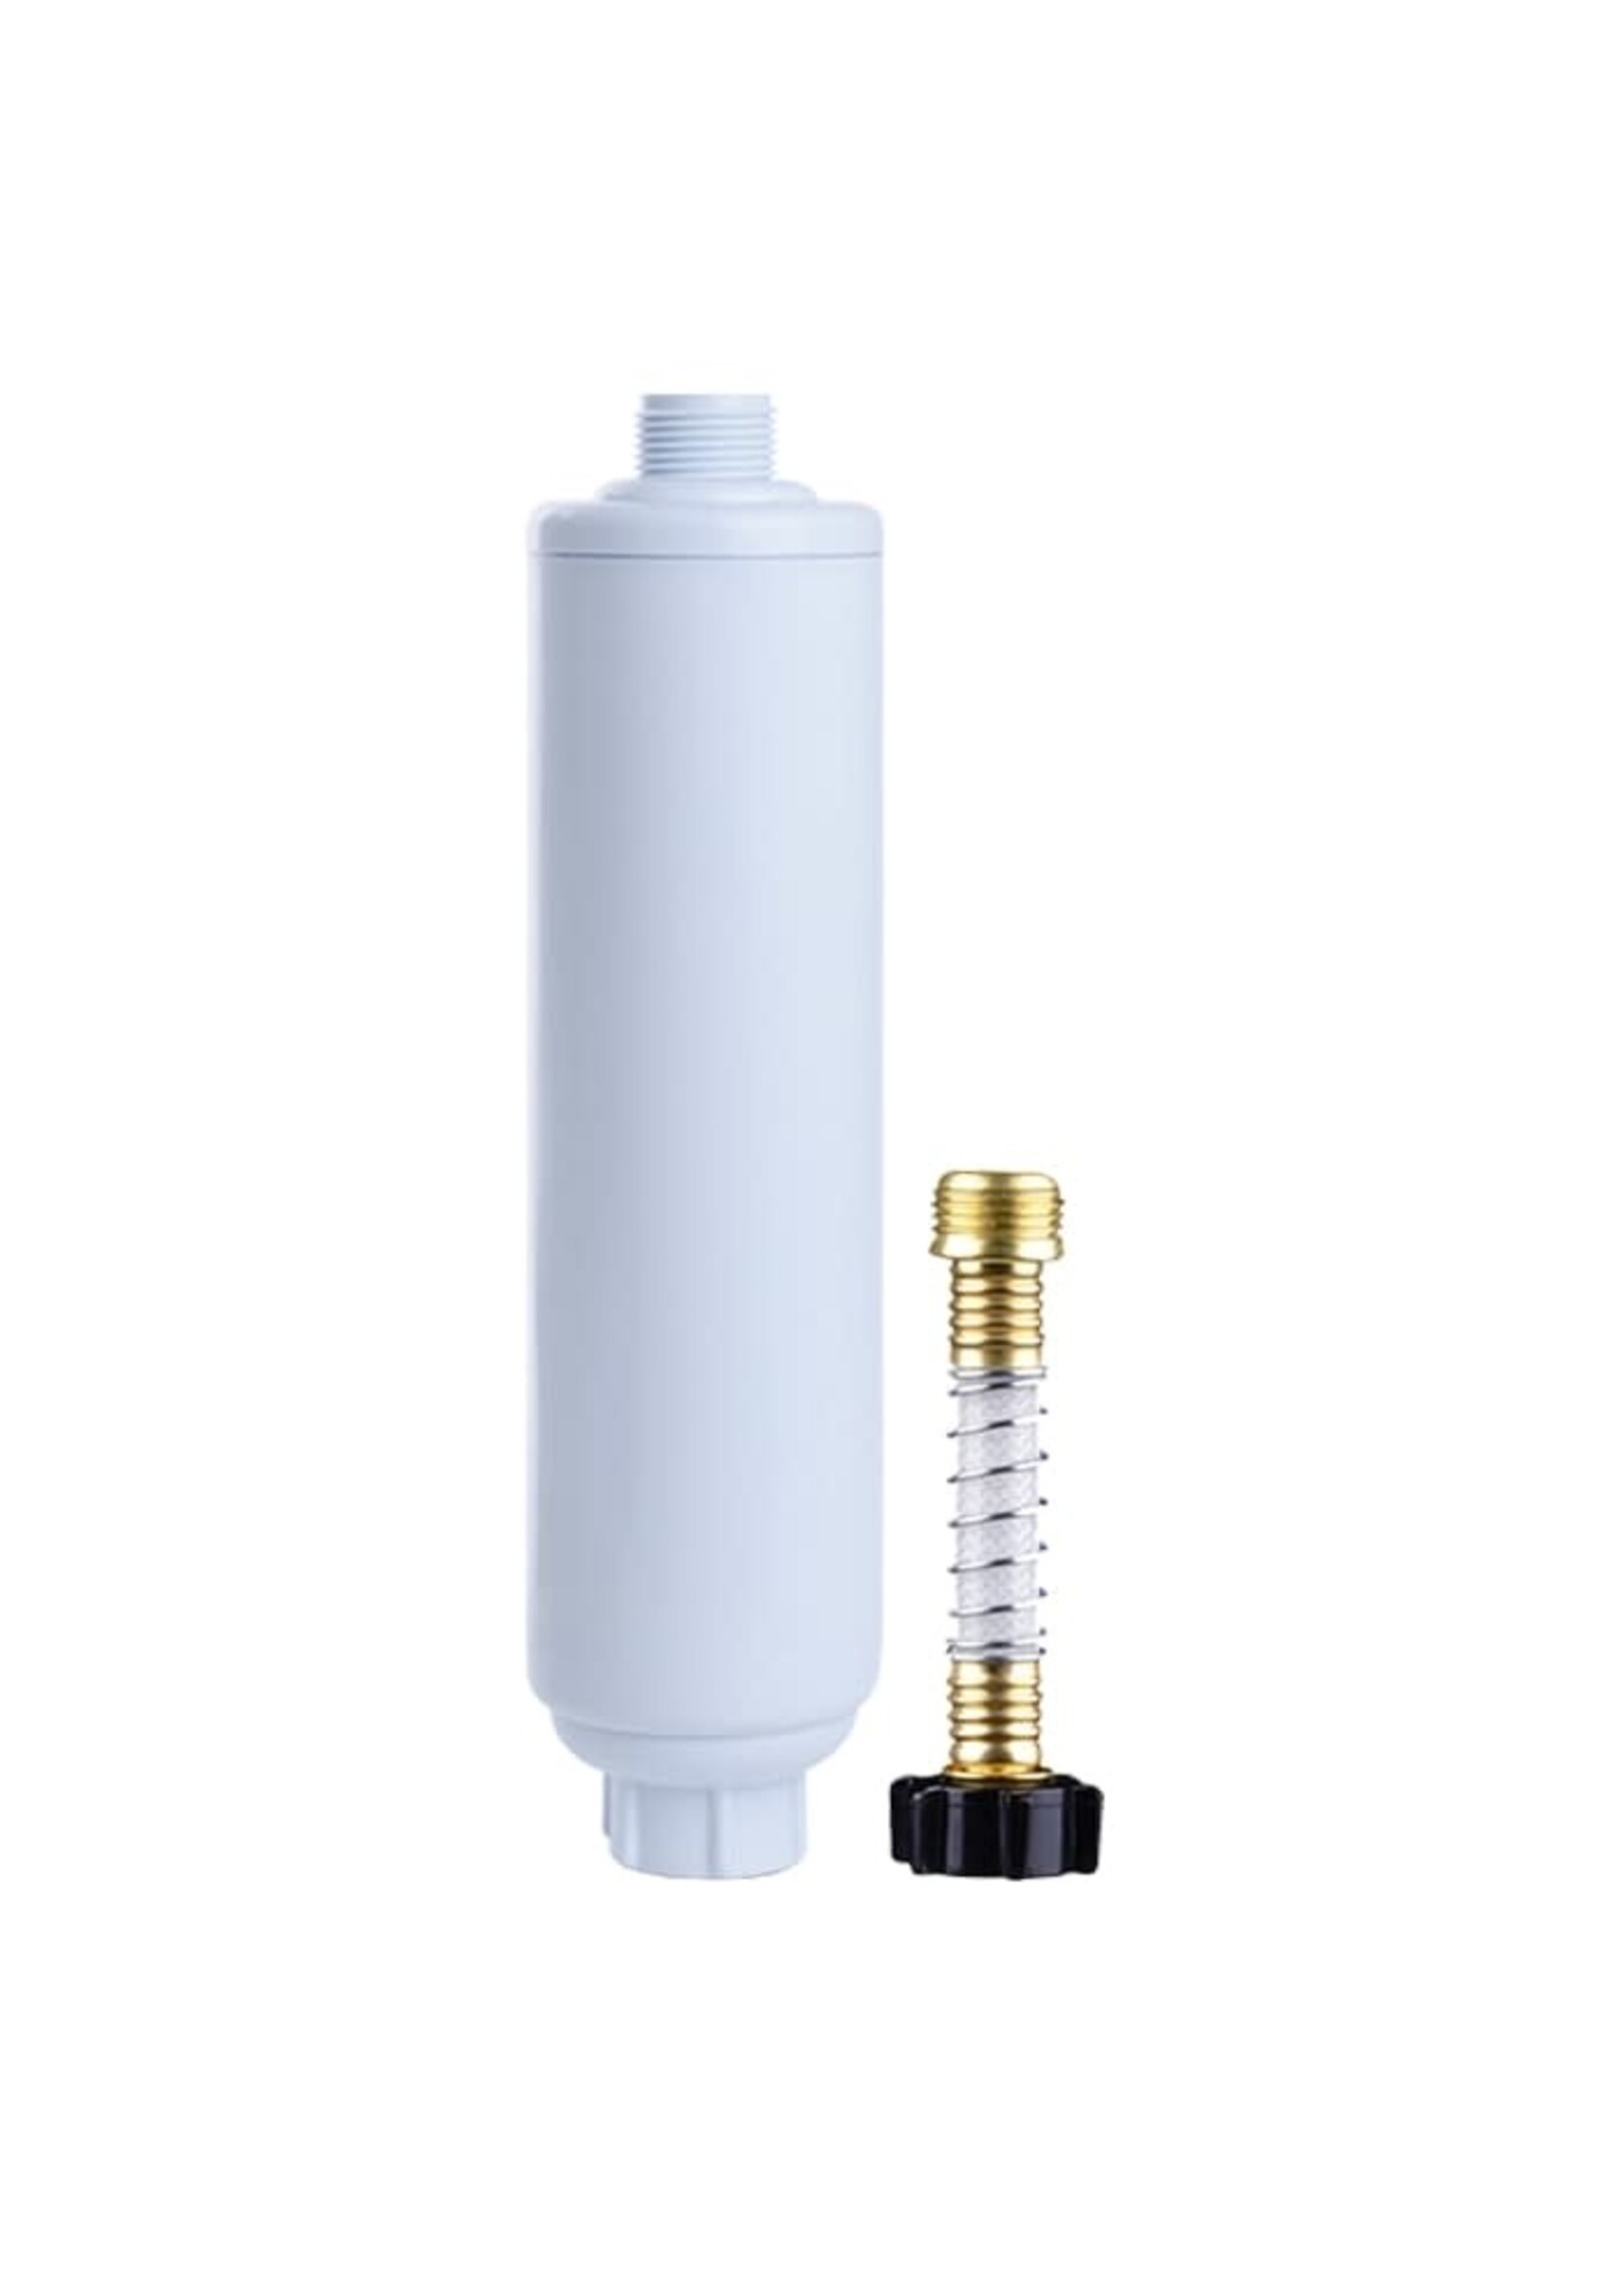 Grow1 GROW1 Inline Garden Water Filter - Chlorine Removal Sediment Removal